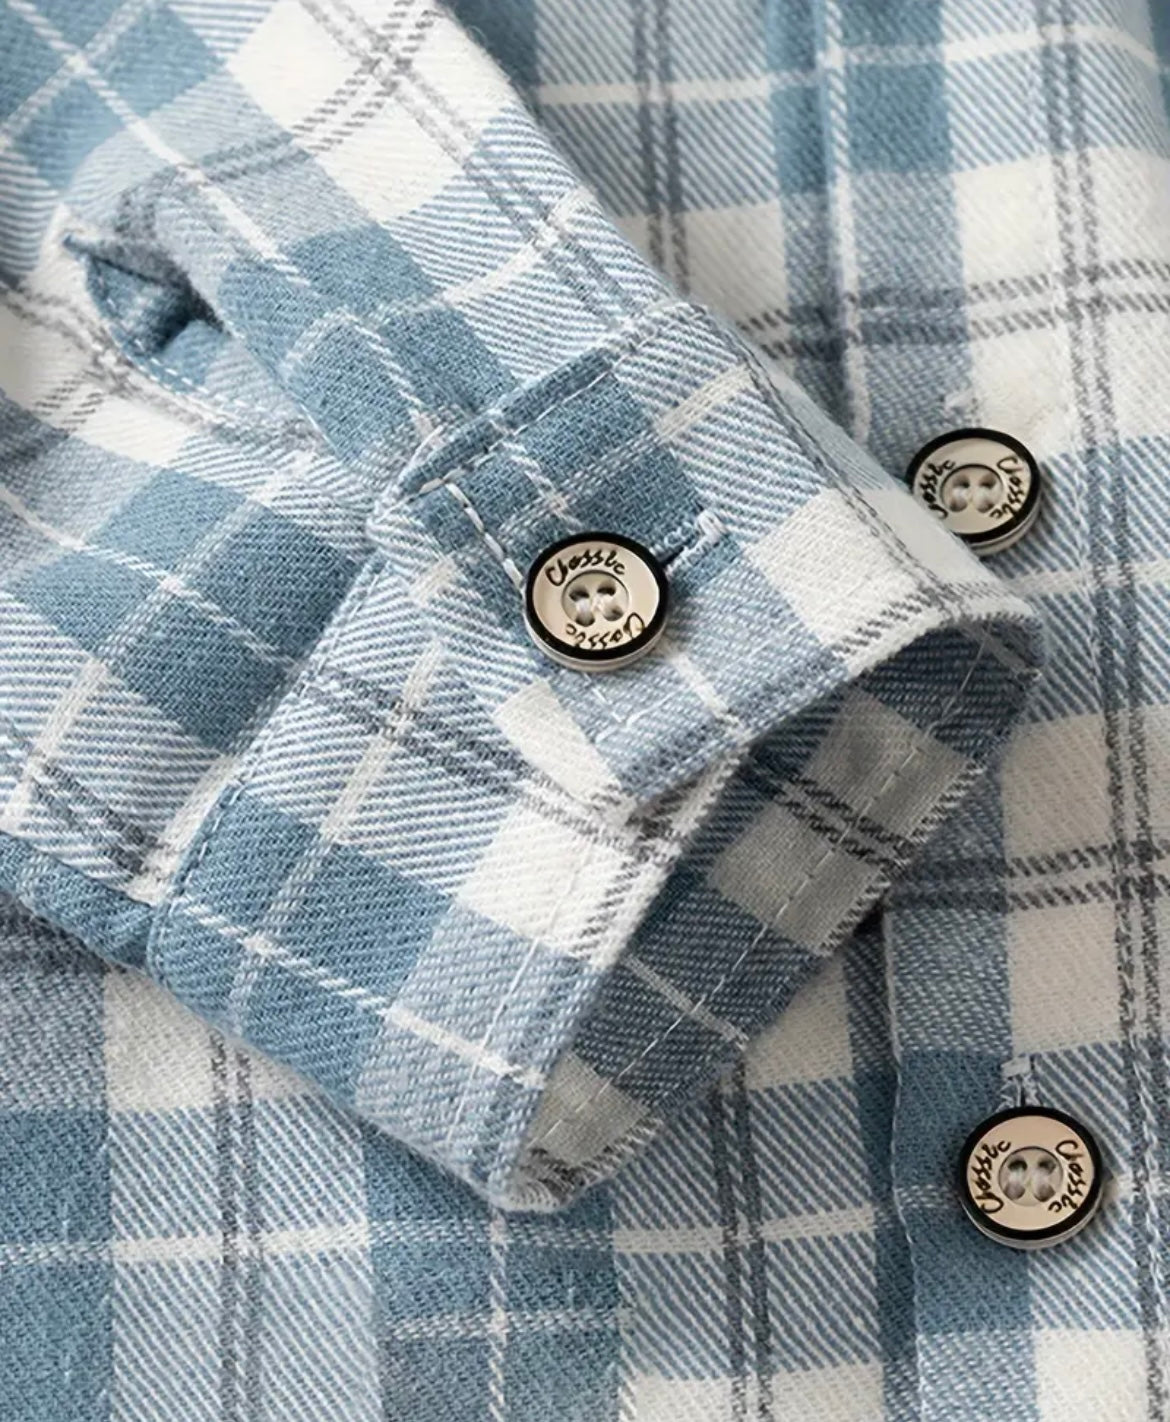 The Baby Blue Flannel